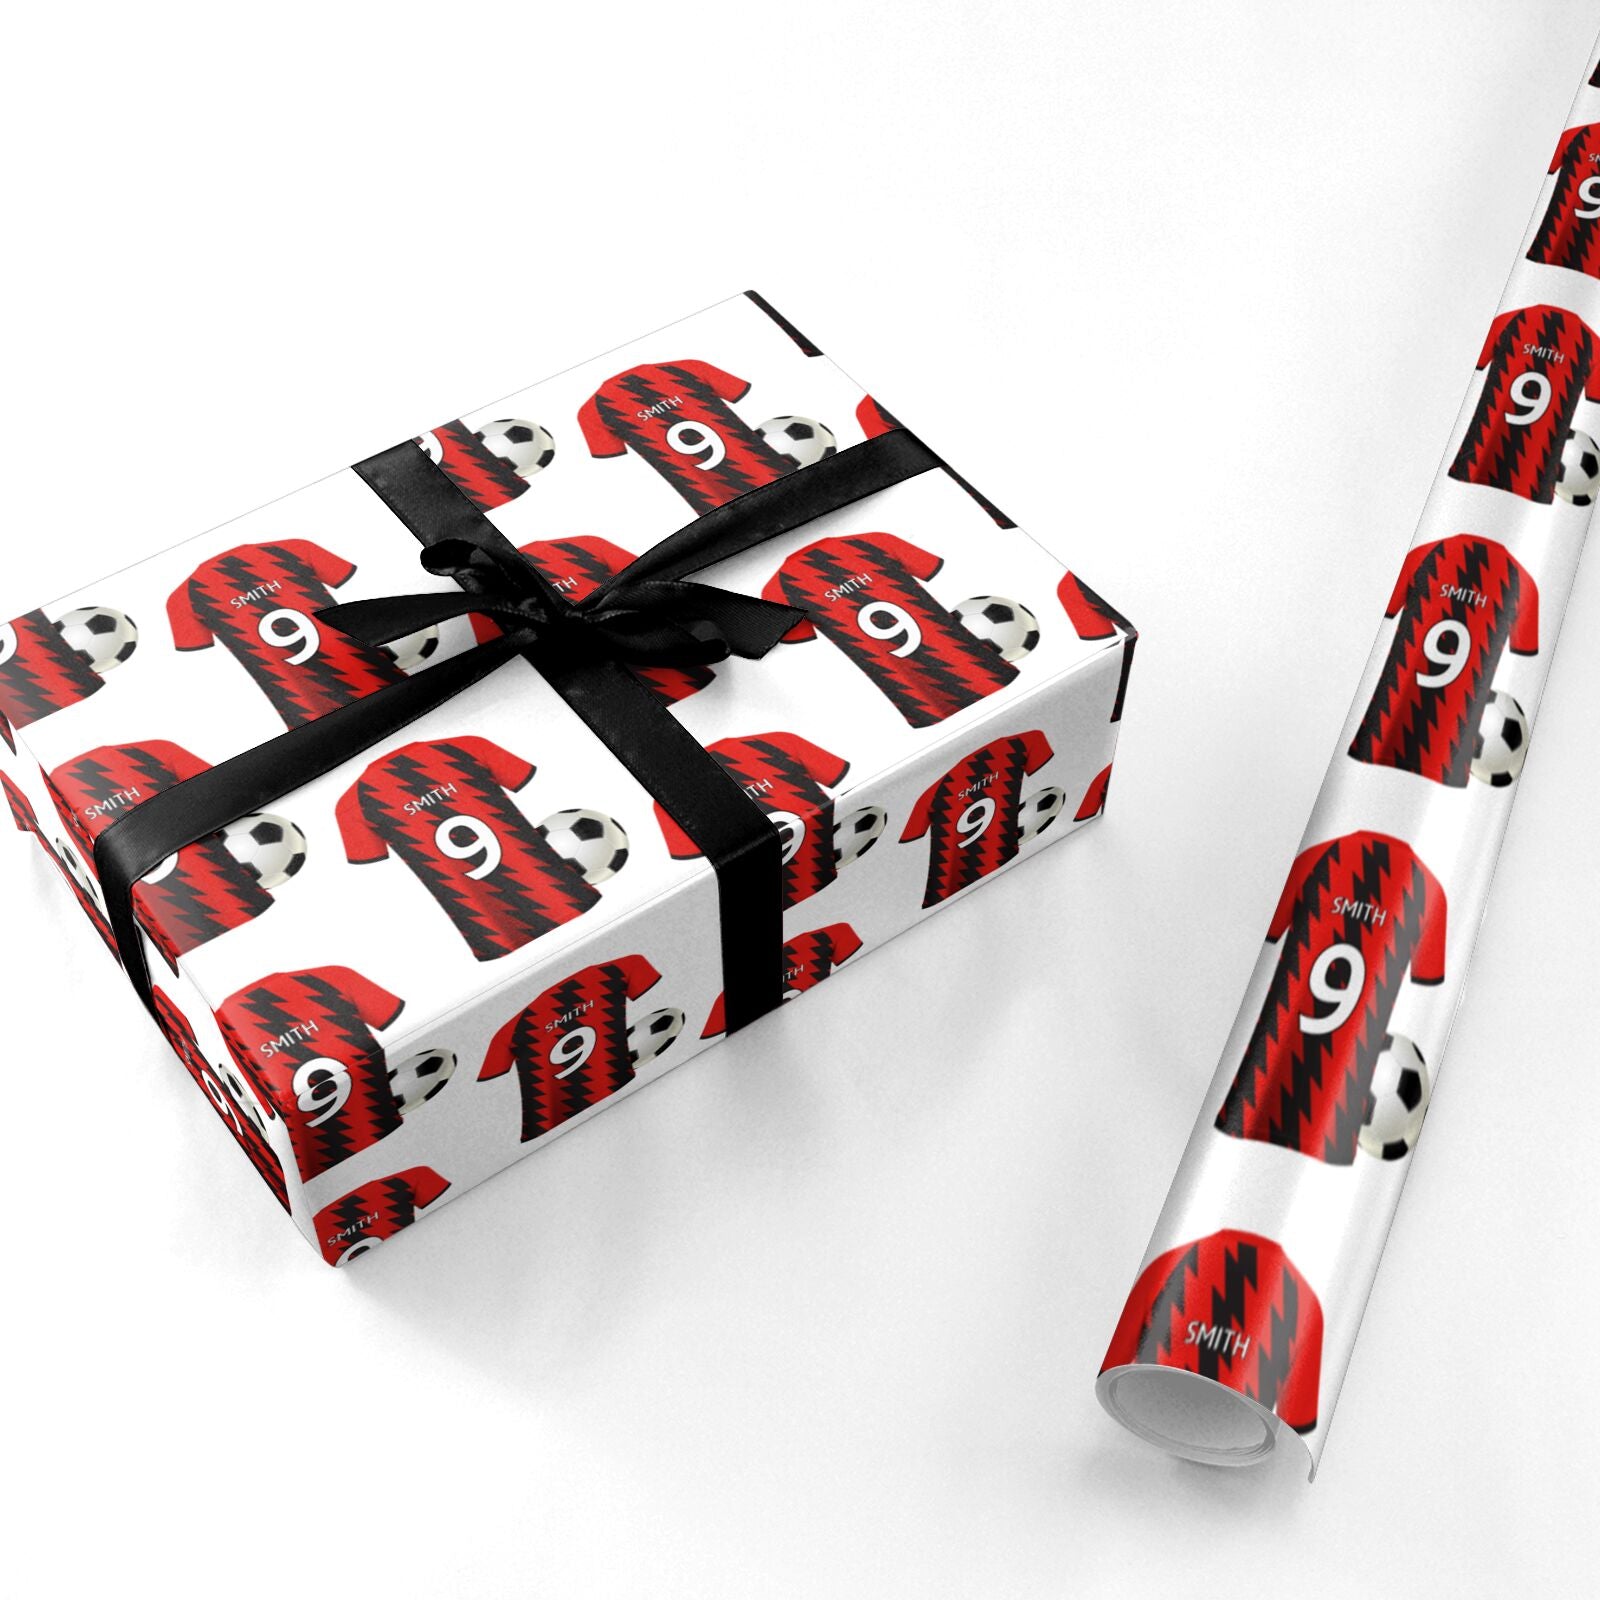 Red and Black Stripes Personalised Football Shirt Personalised Wrapping Paper